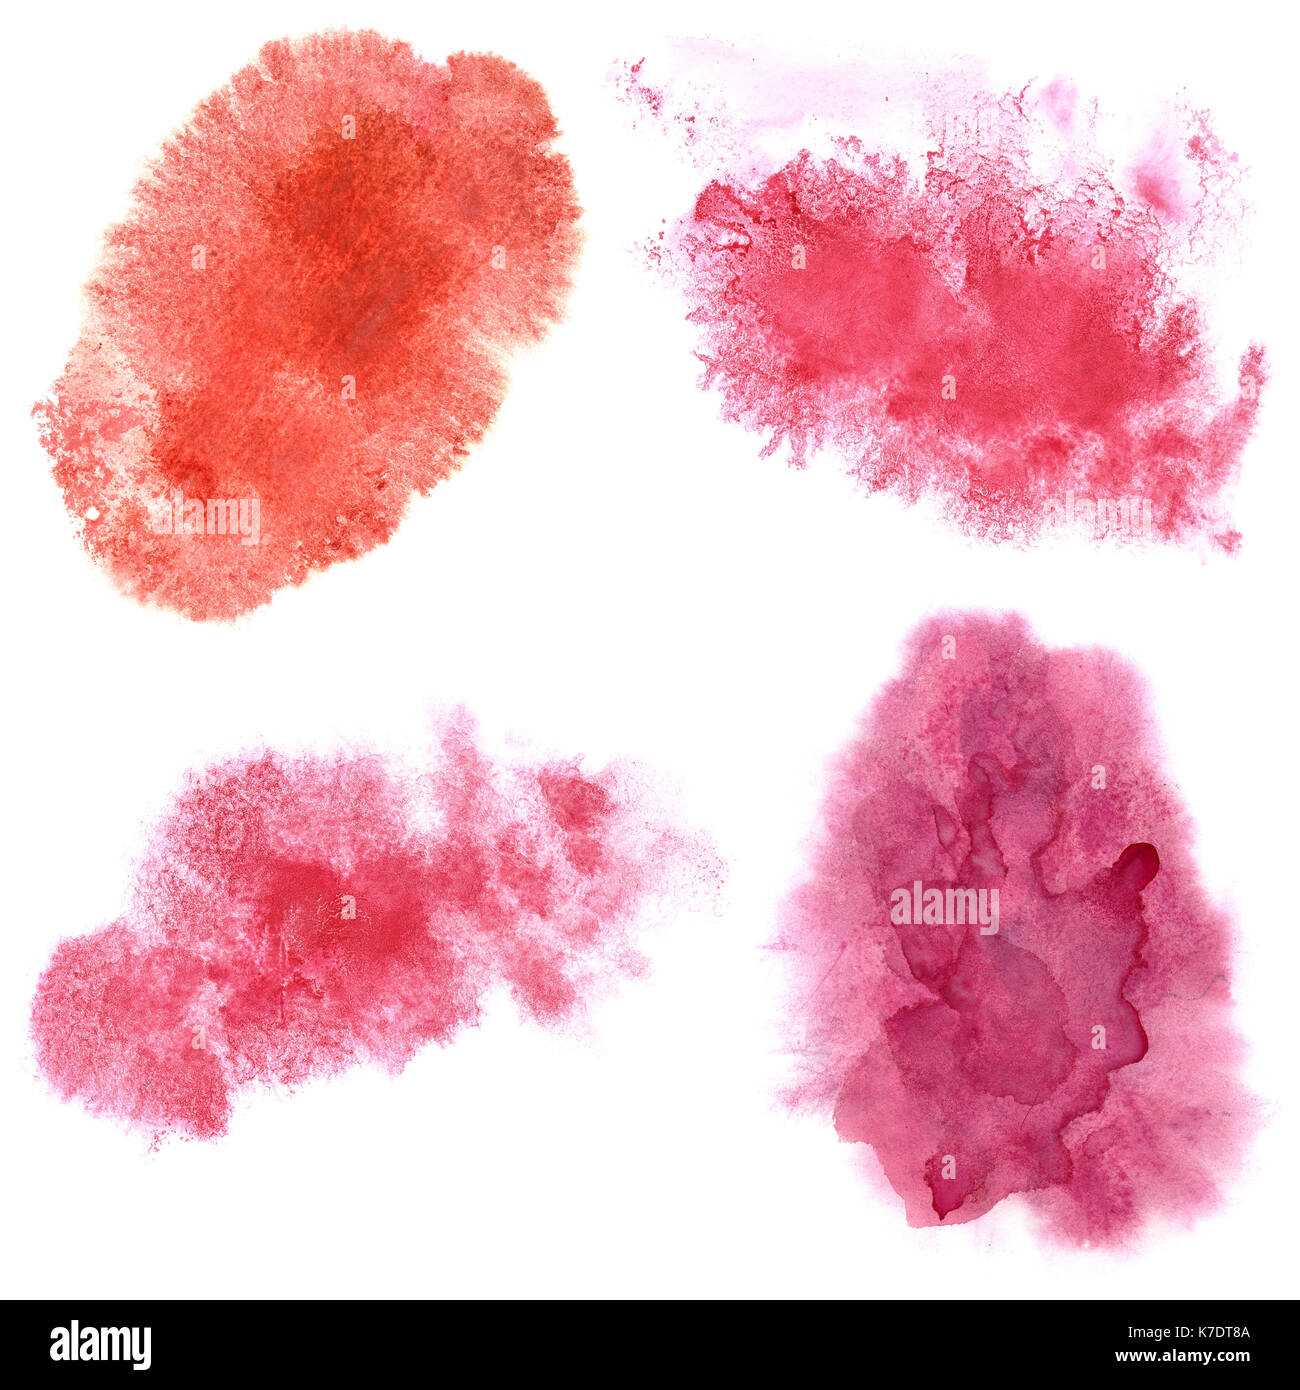 Set of watercolor stains isolated on the white background. Watercolour elements for your design Stock Photo